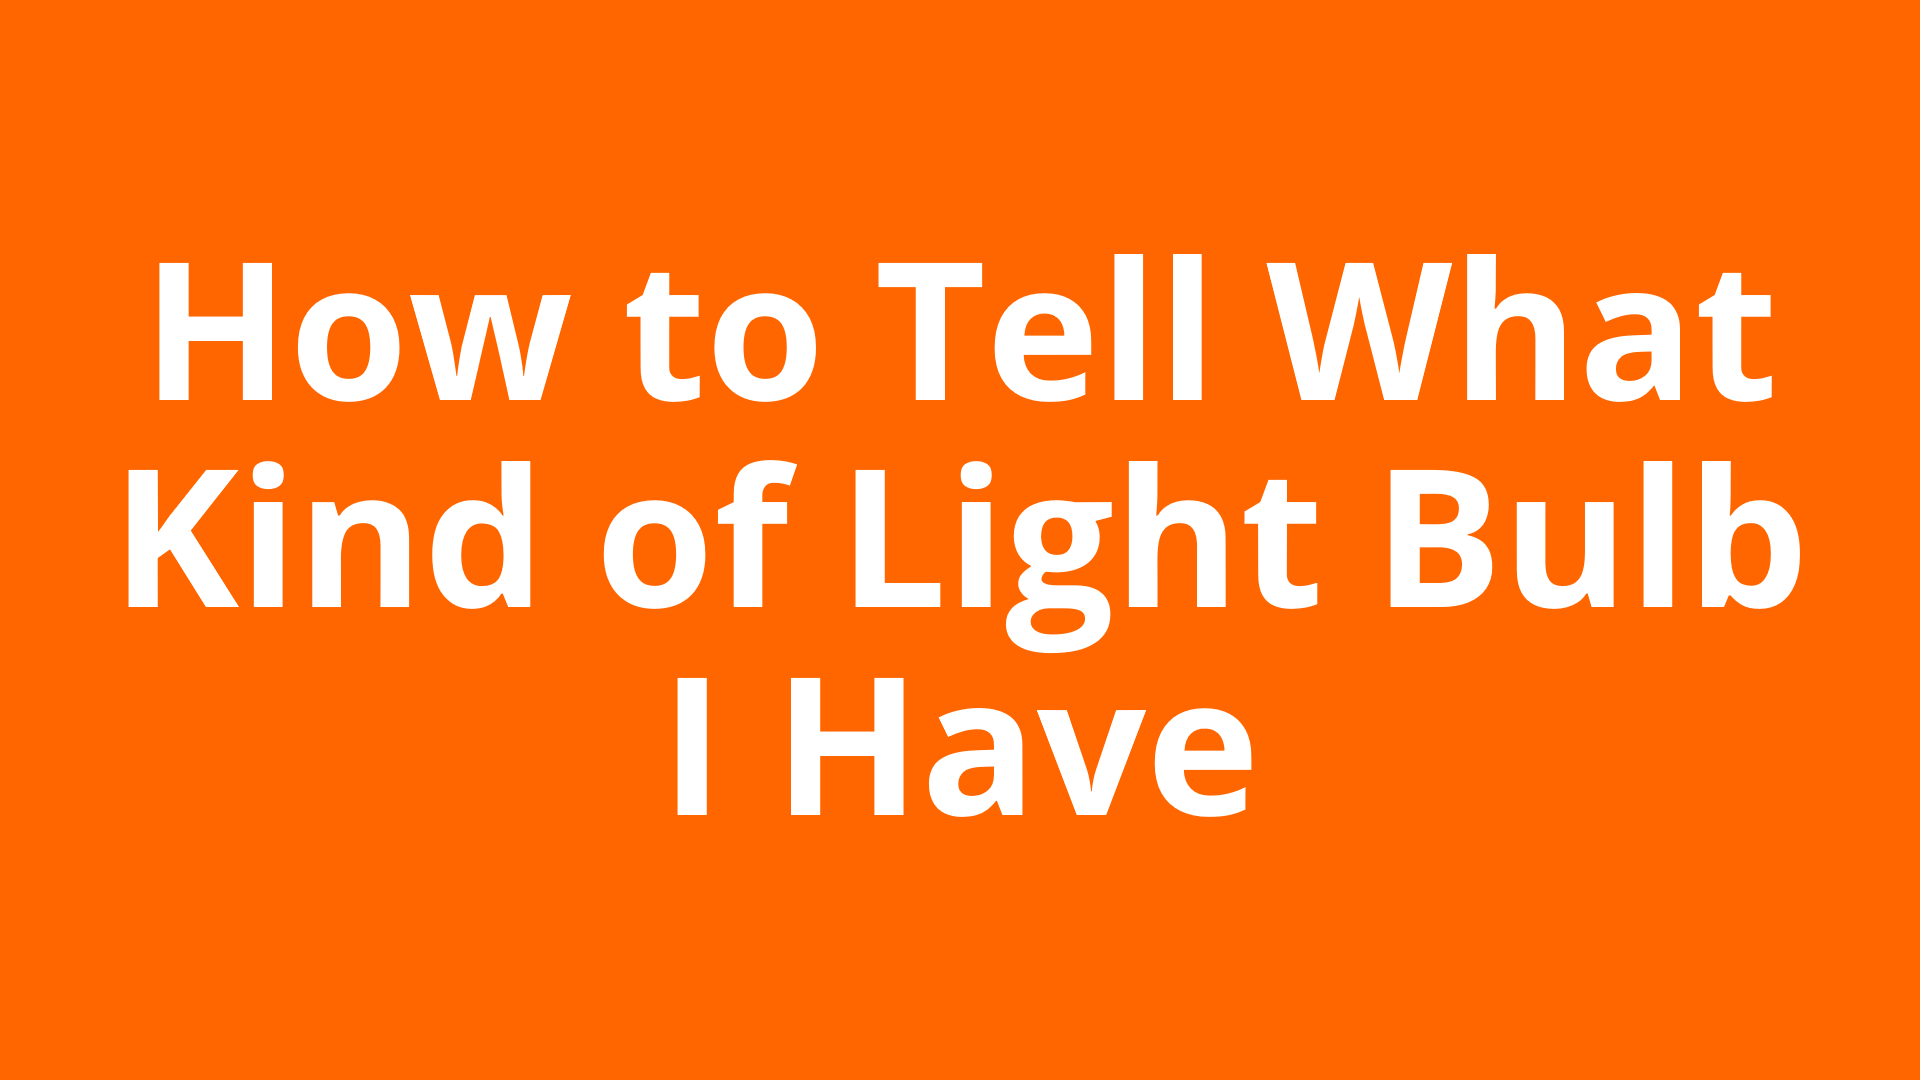 How to Tell What Kind of Light Bulb I Have